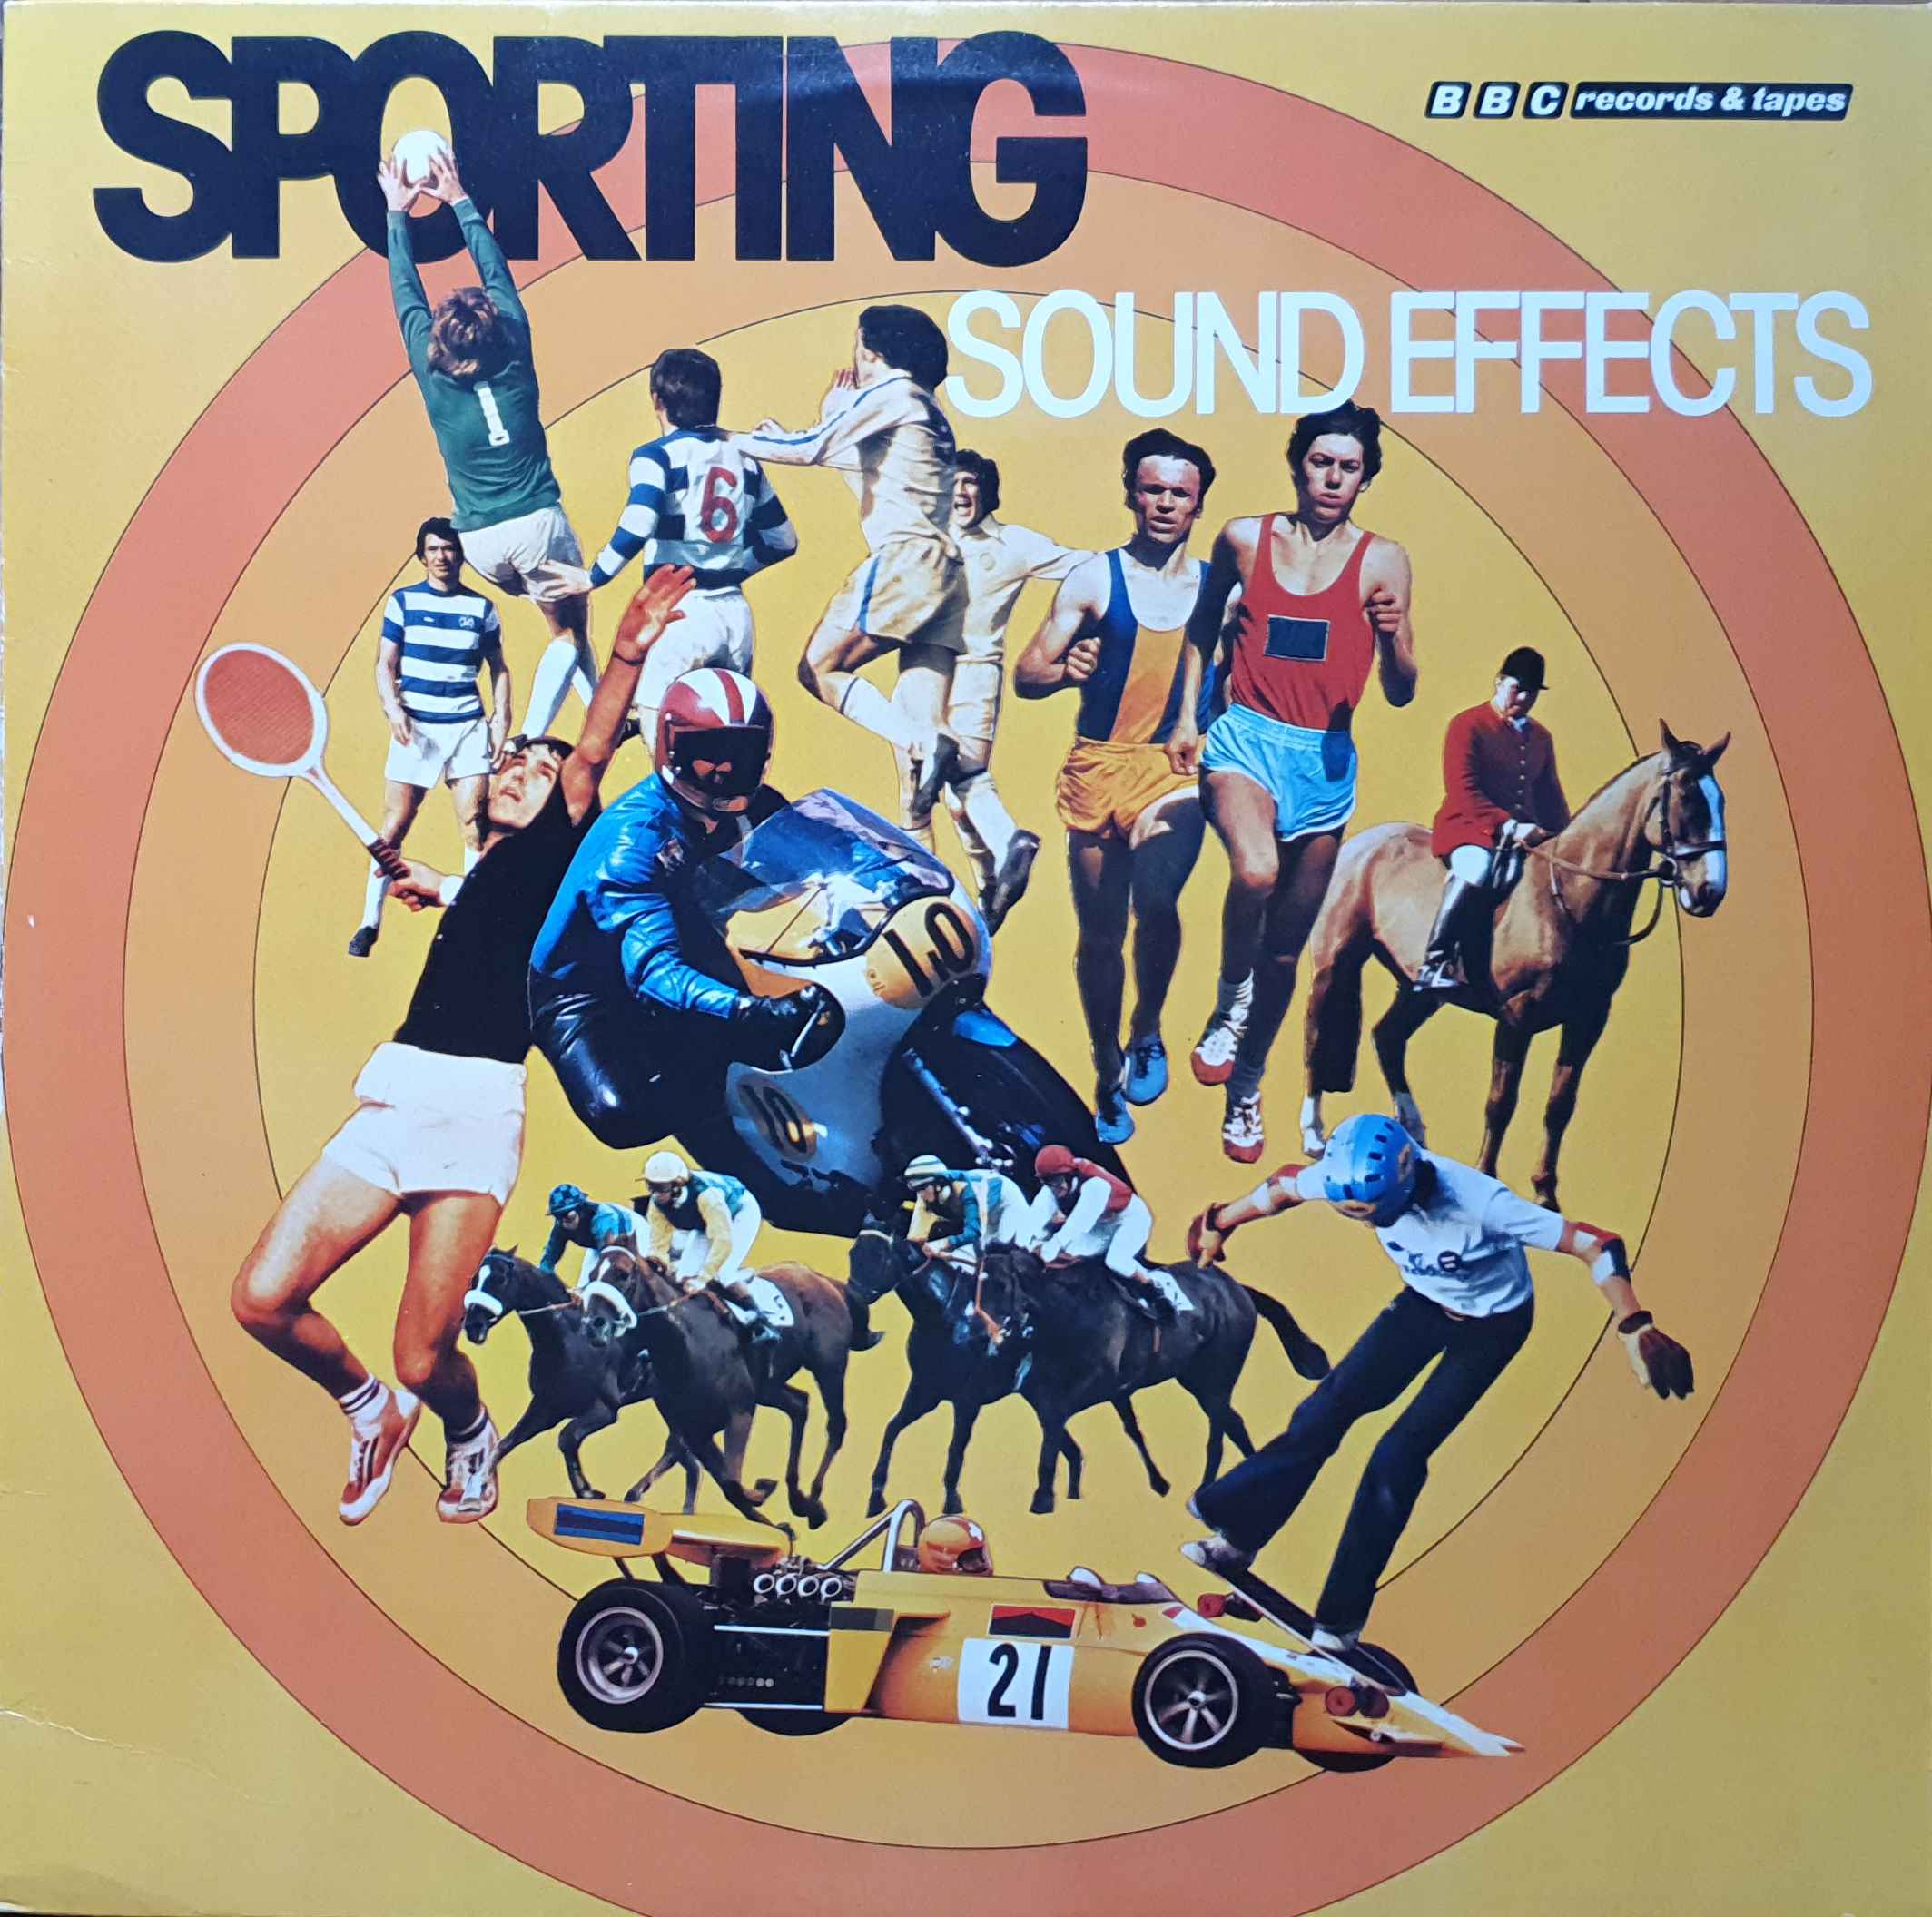 Picture of INT 128.003 Sporting Sound Effects by artist Various from the BBC albums - Records and Tapes library